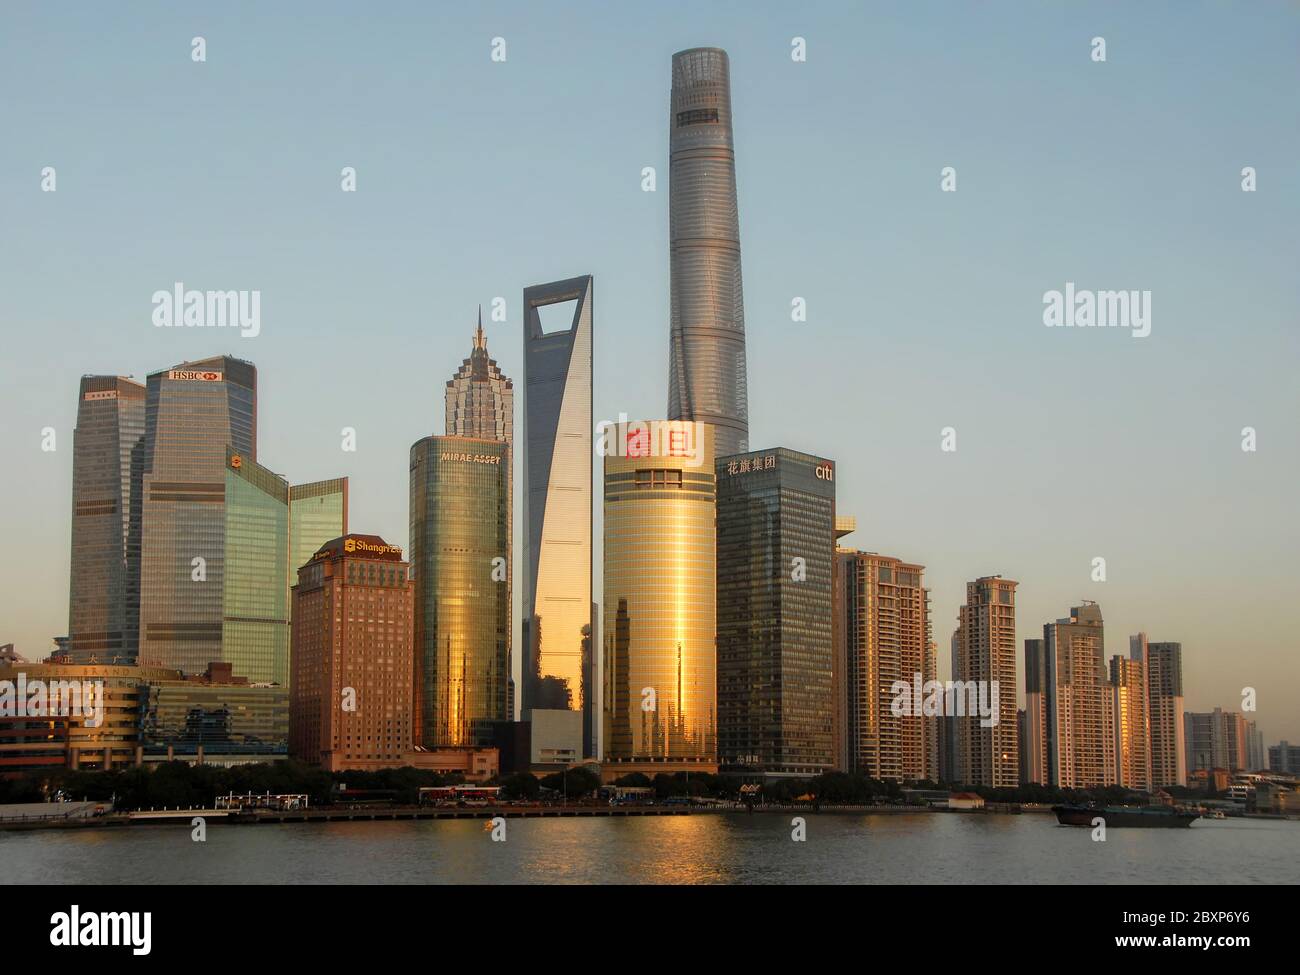 Shanghai skyline, China: The tall modern buildings in the business district of Lujiazui in Pudong, Shanghai with the Huangpu River in the foreground. Stock Photo